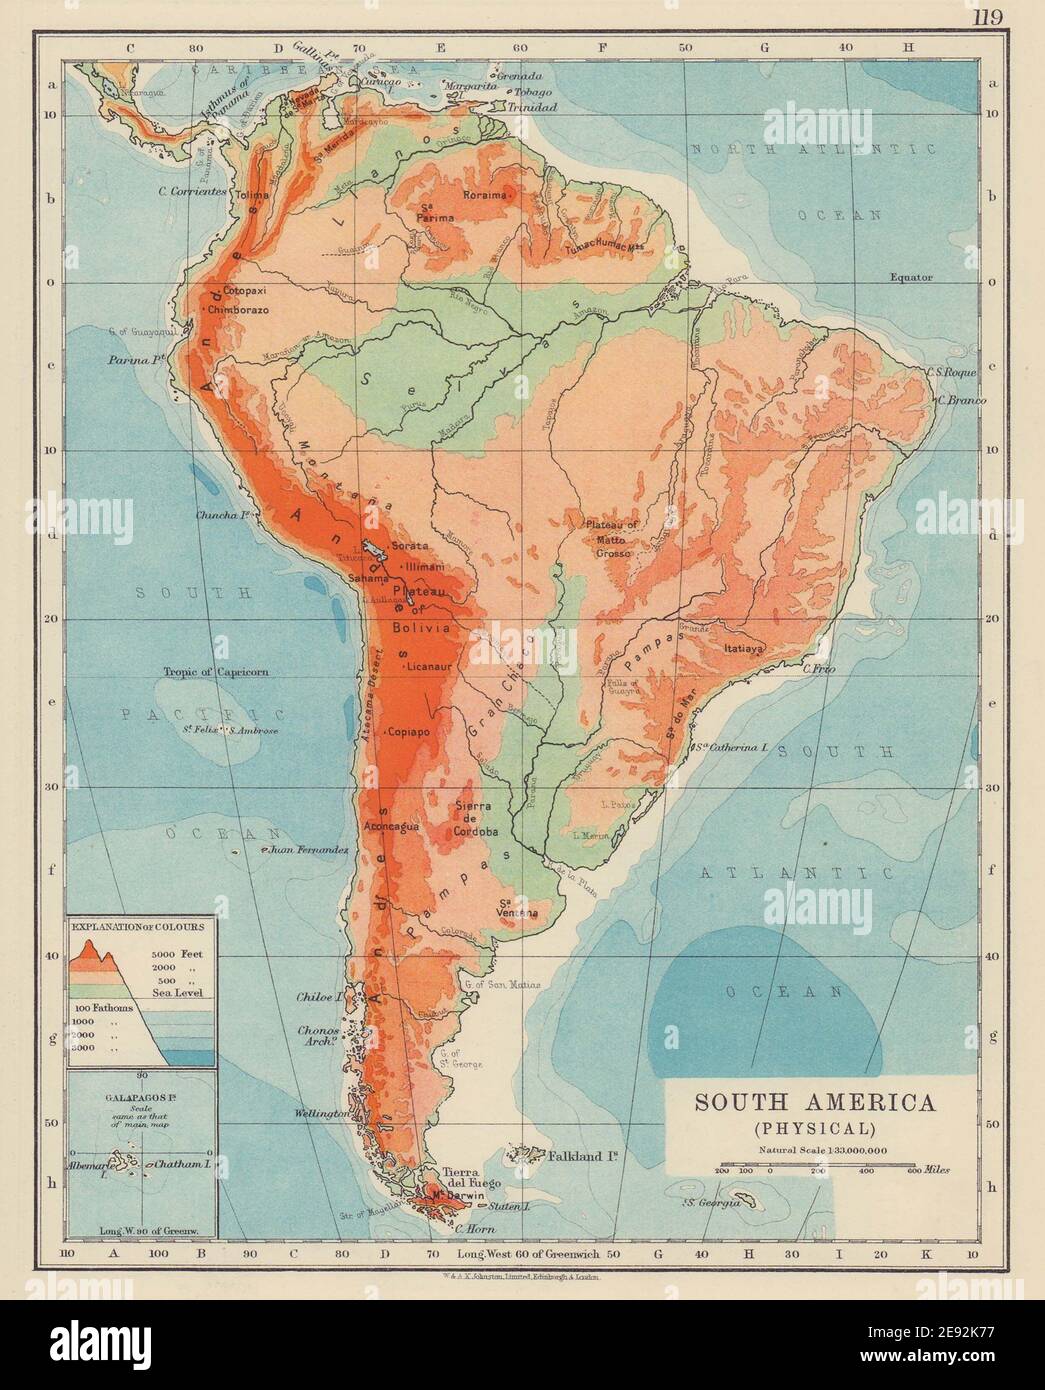 SOUTH AMERICA PHYSICAL. Andes Amazon basin. JOHNSTON 1910 old antique map  Stock Photo - Alamy